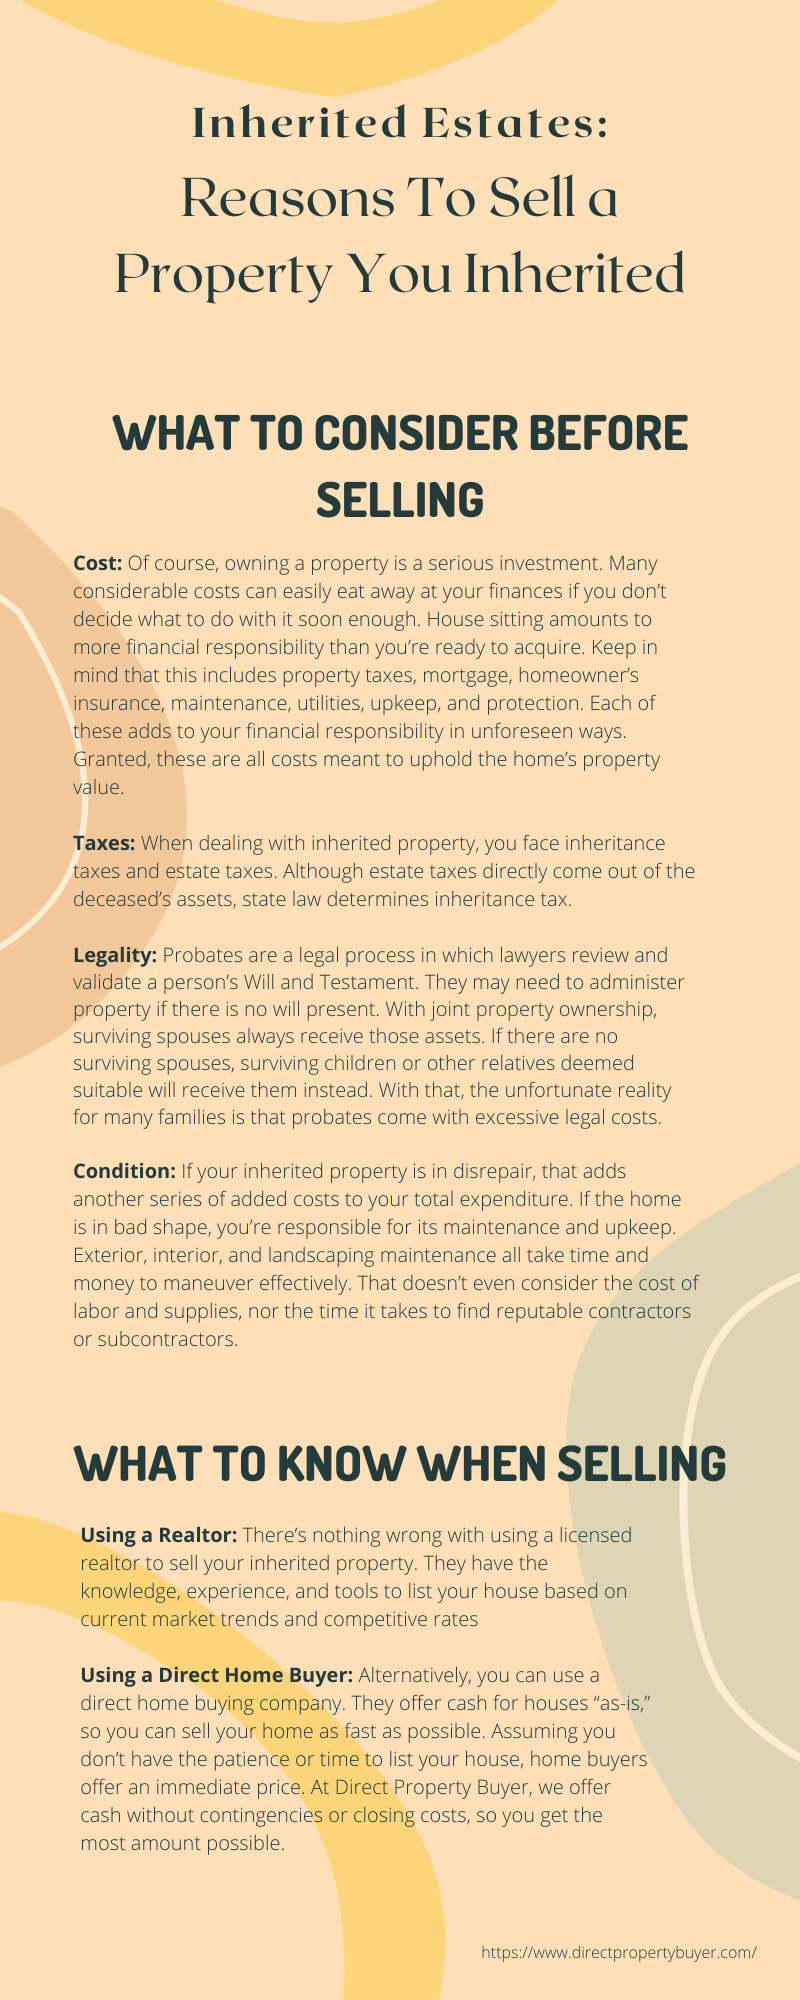 Inherited Estates: Reasons To Sell a Property You Inherited